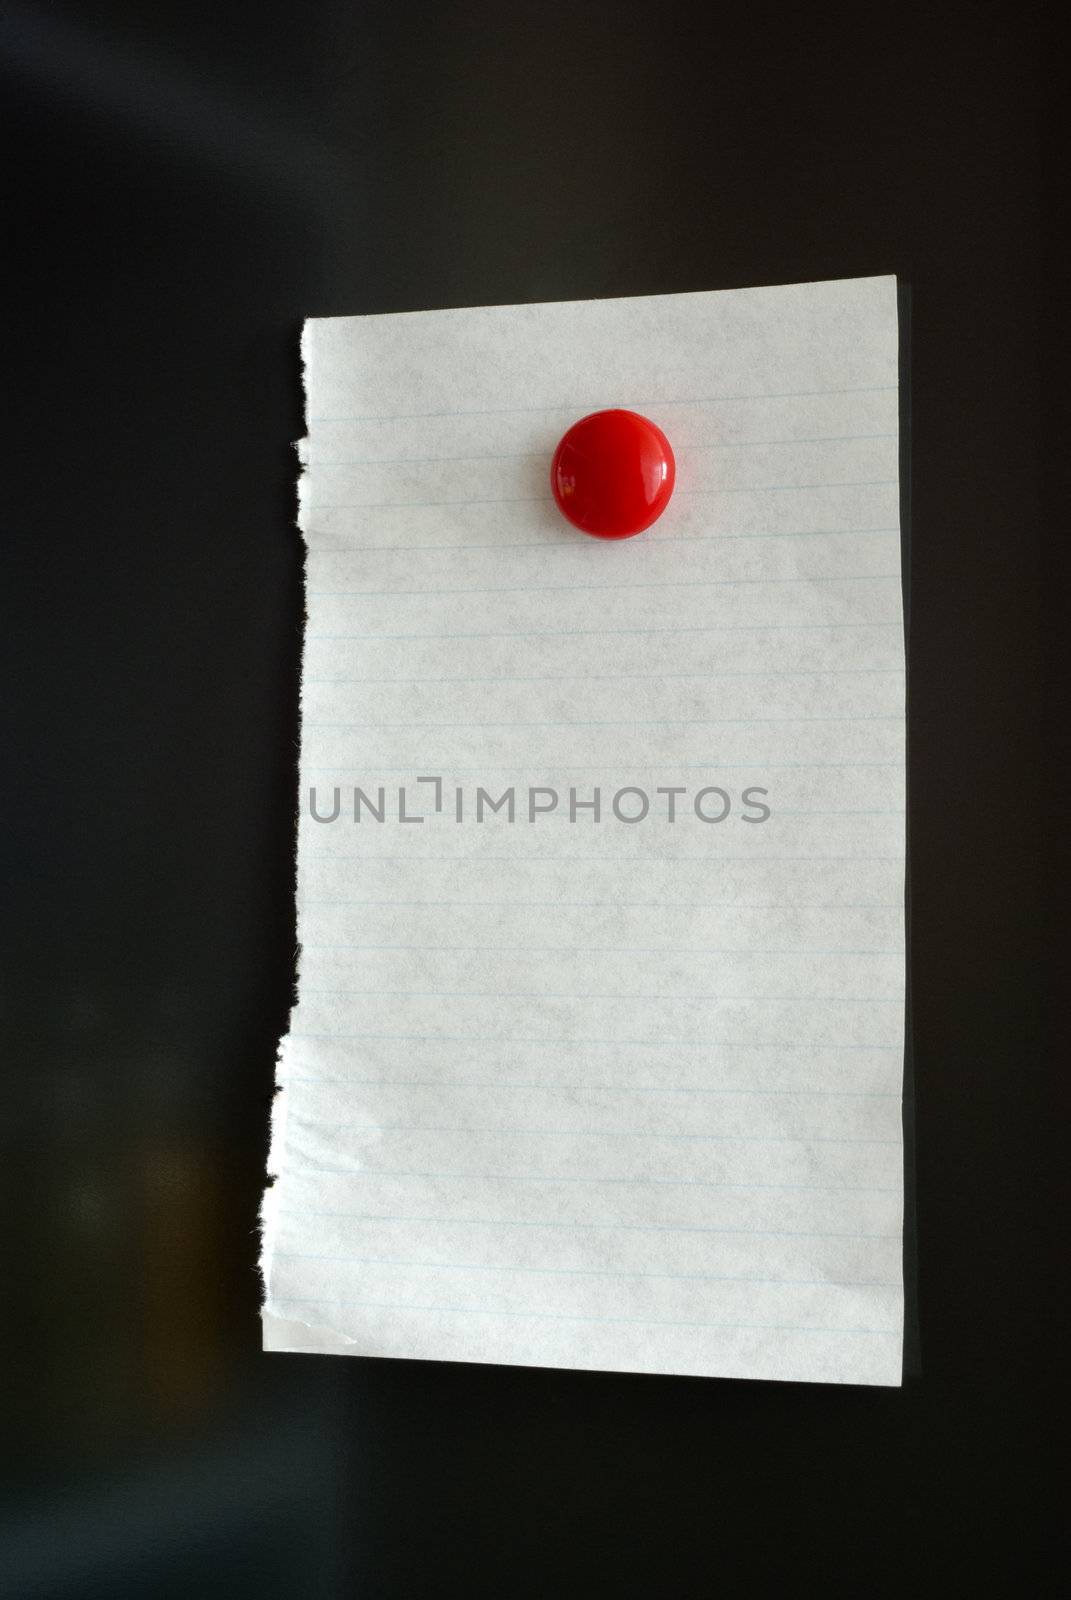 Piece of lined paper attached to fridge with a red button magnet. Fridge is dark and some parts of kitchen are slightly reflected.